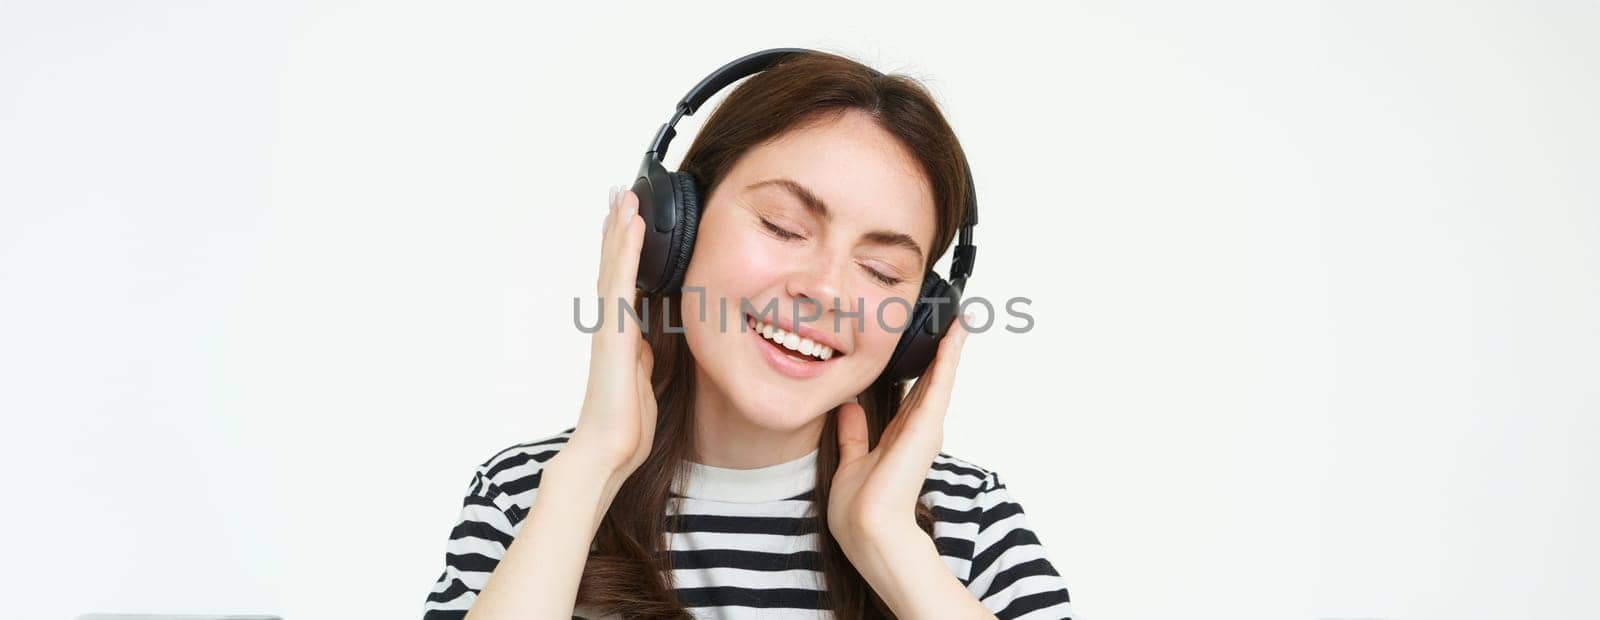 Portrait of beautiful woman in wireless headphones, listening music, using earphones, smiling at camera, standing over white background.